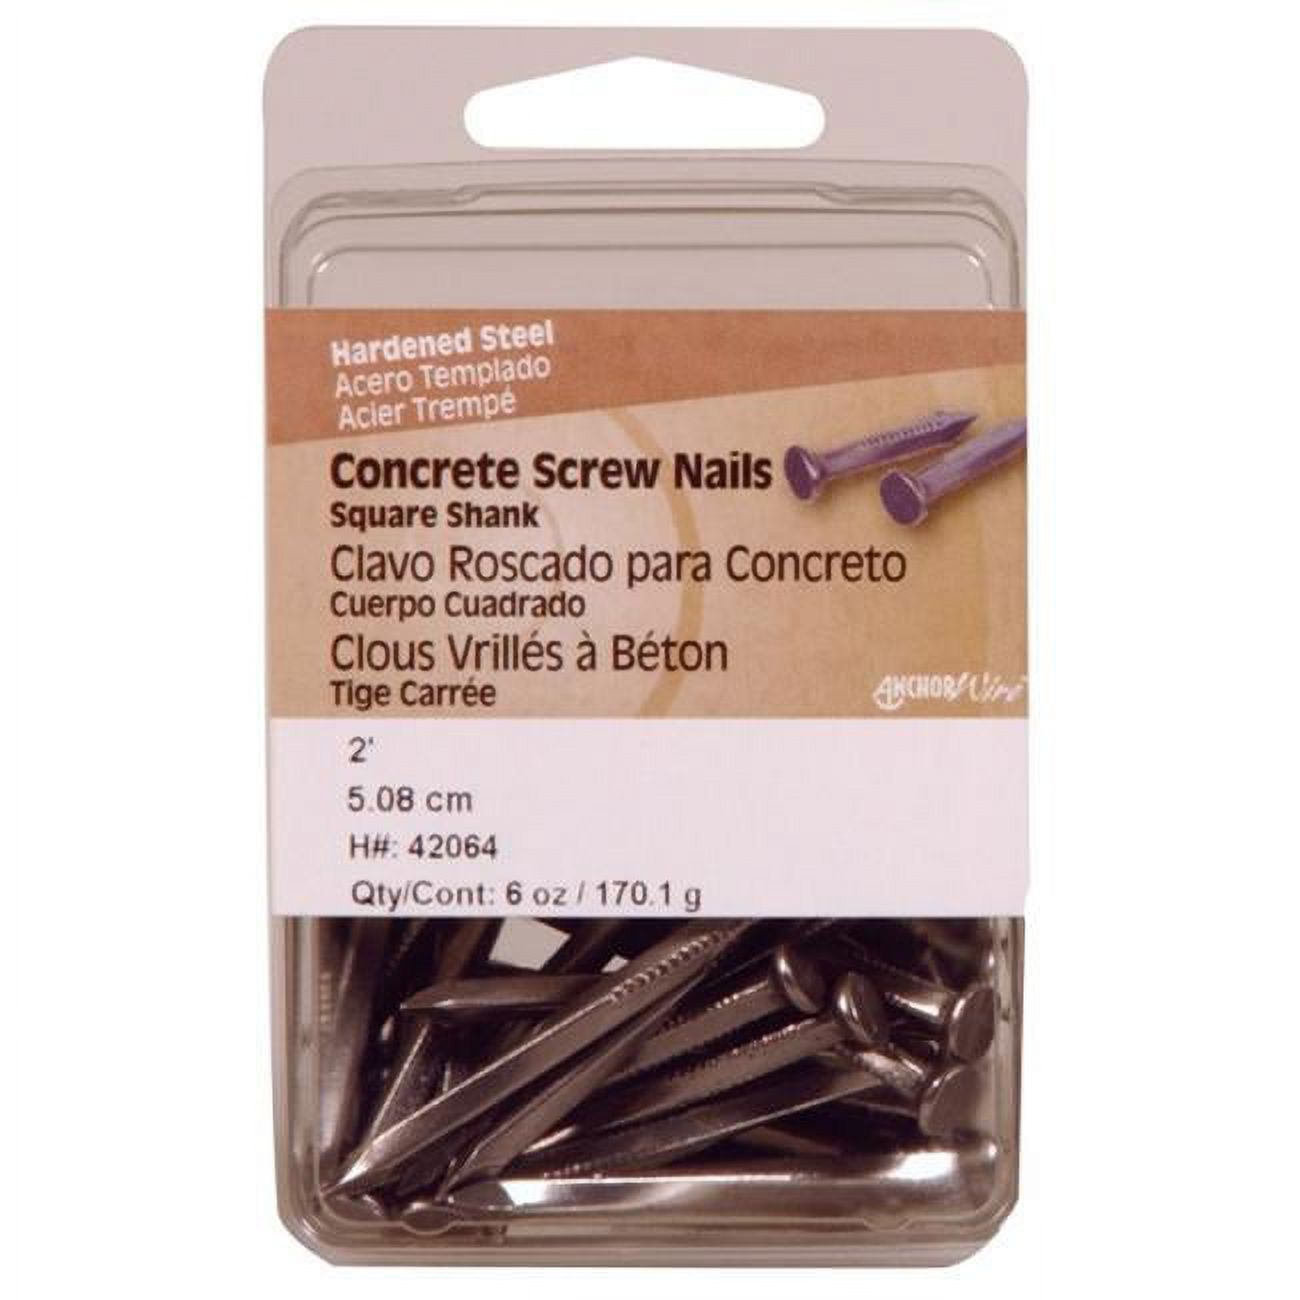 Hillman Concrete Screw Nails 2 " Square Steel Clamshell Pack of 5 - image 1 of 2